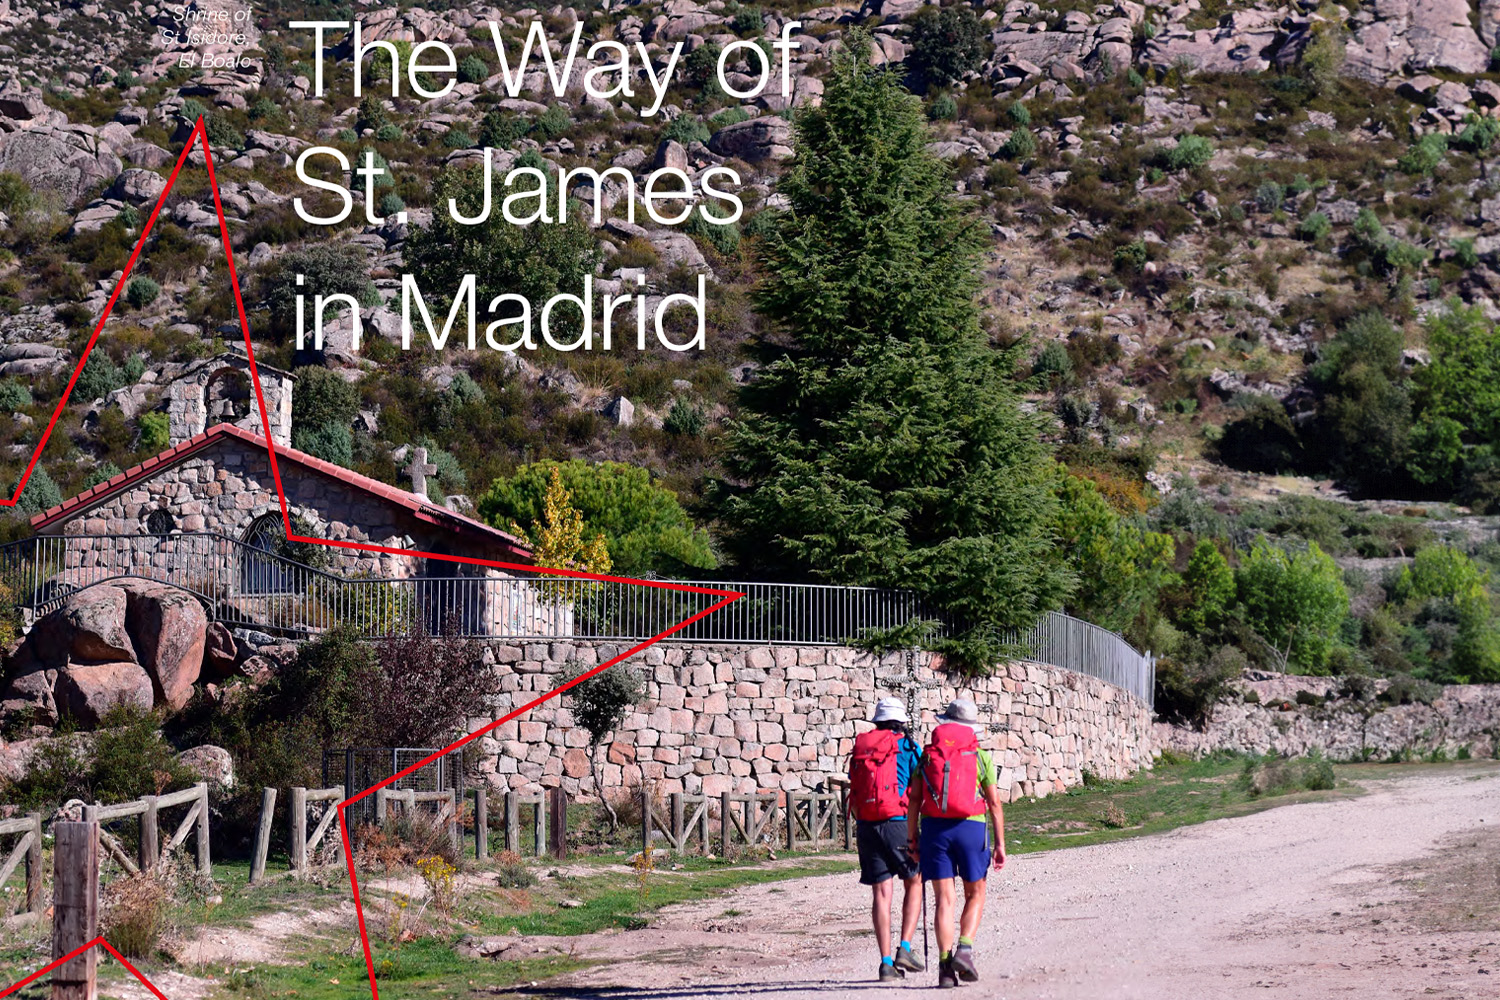 The Way of St. James in Madrid